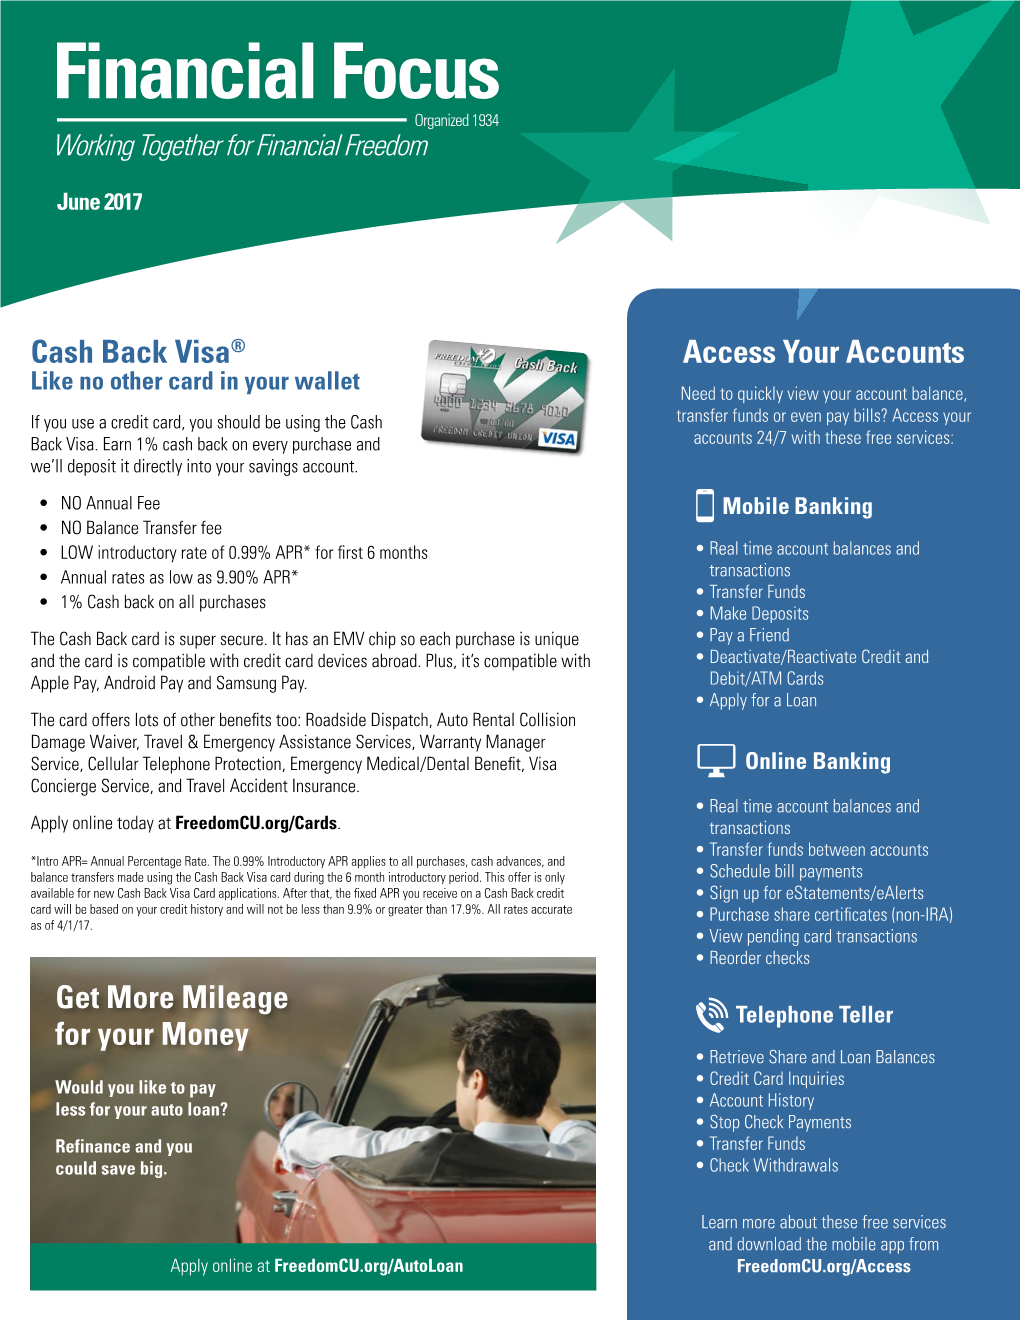 Cash Back Visa® Access Your Accounts Get More Mileage for Your